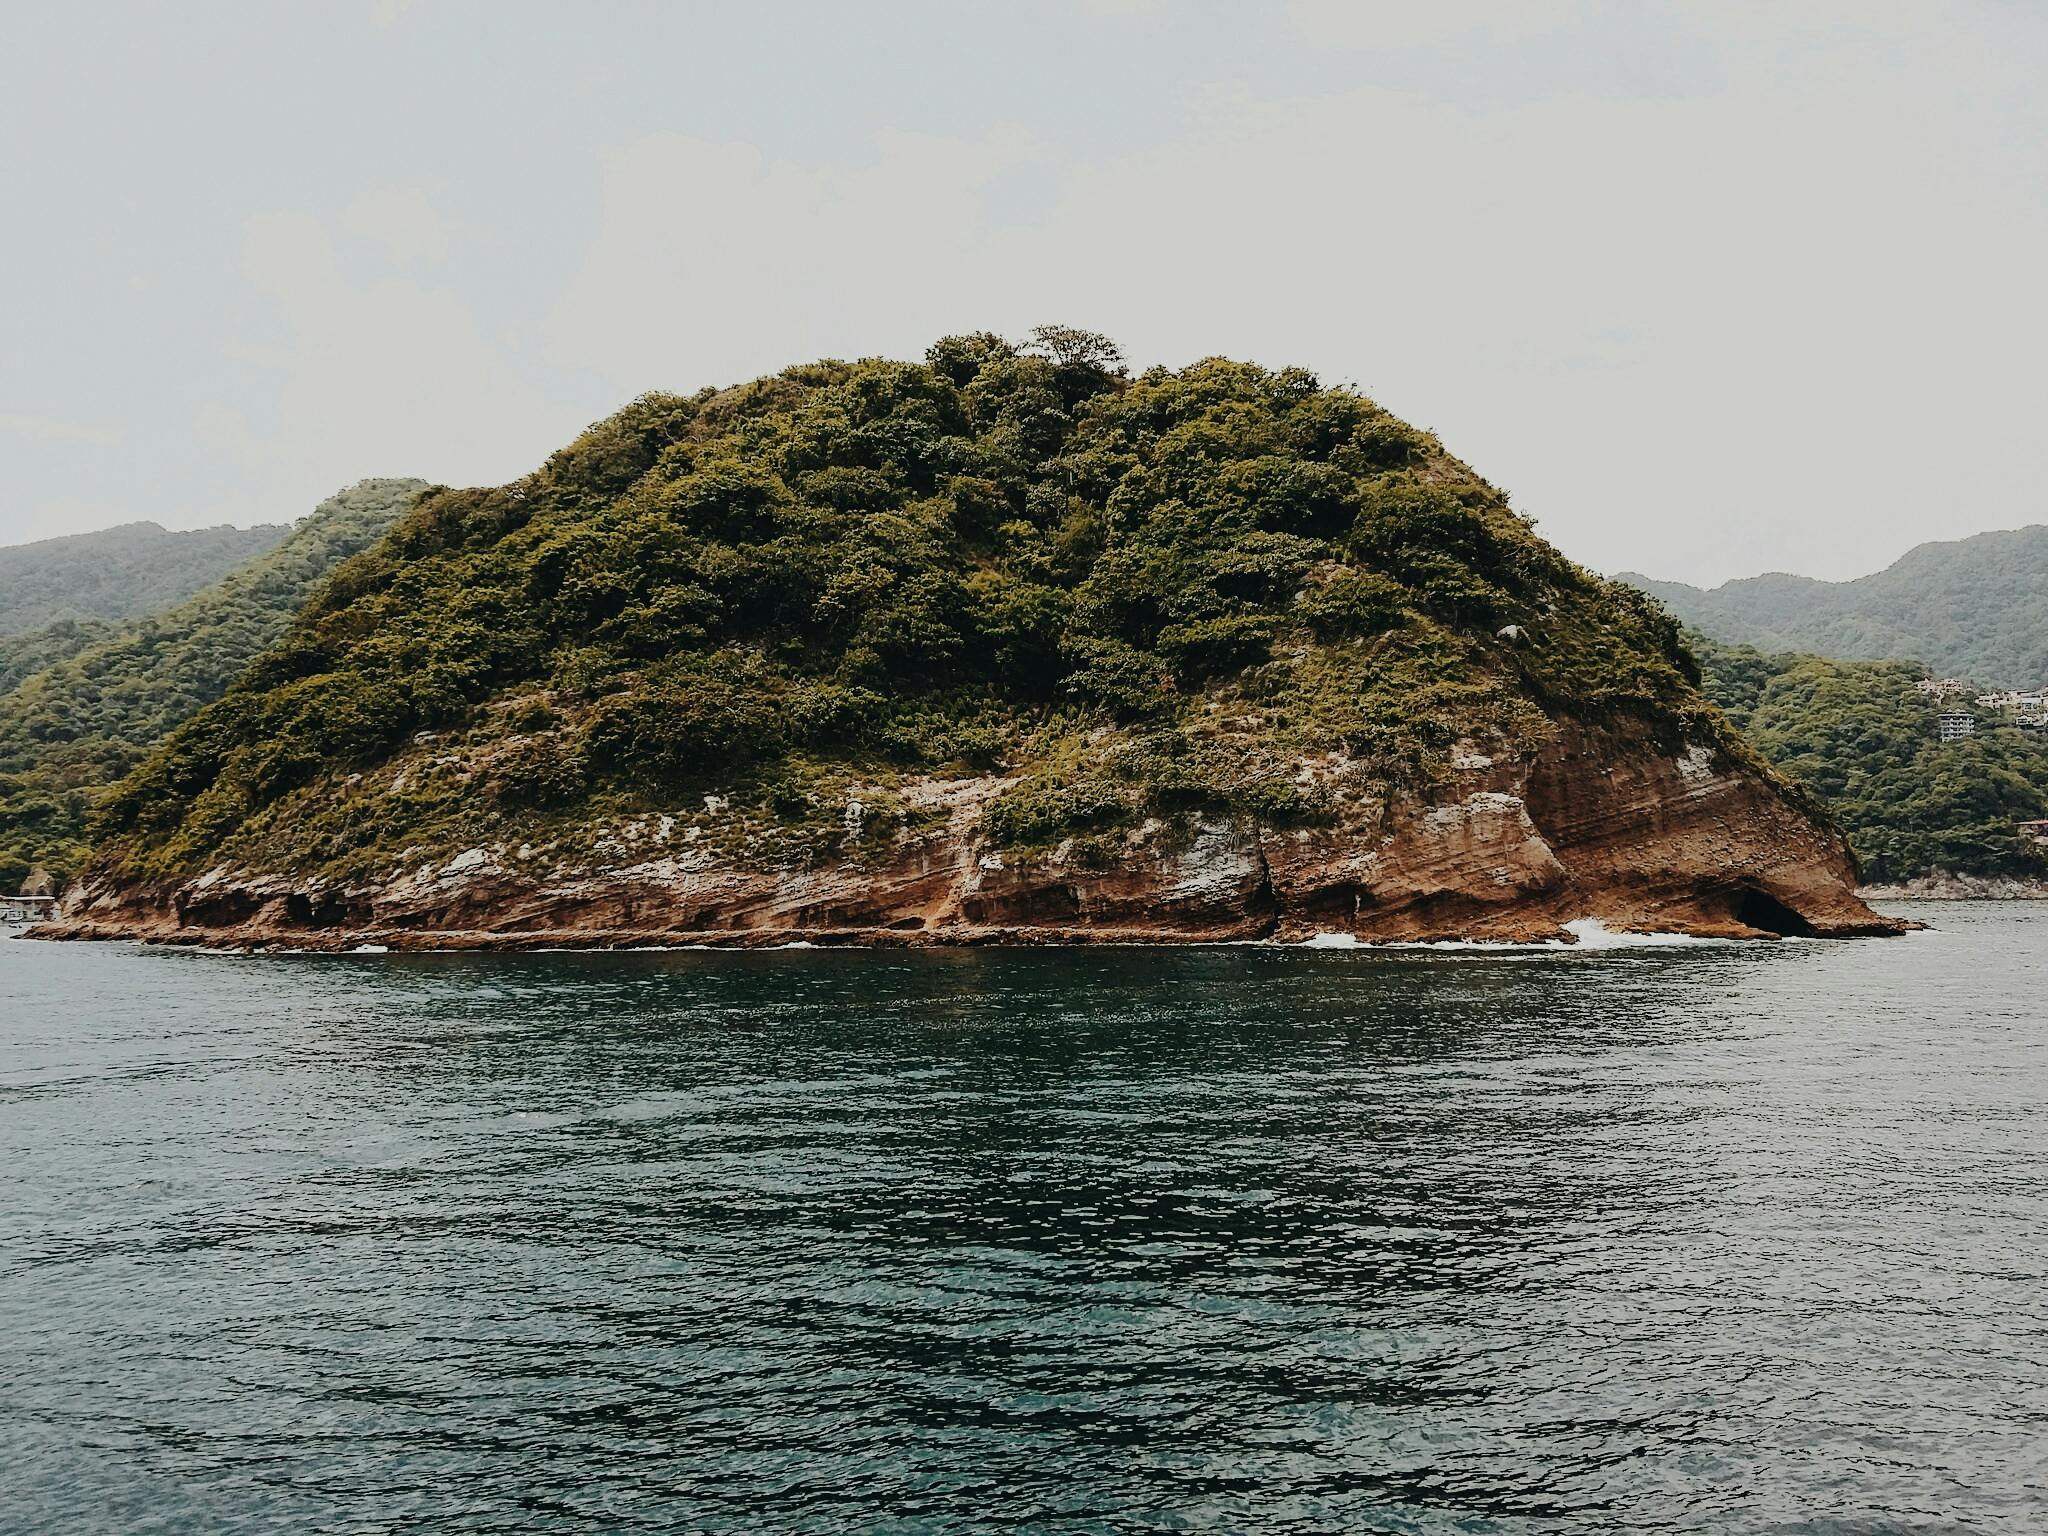 a small island in the middle of a body of water, an album cover, pexels contest winner, mingei, kamakura scenery, puerto rico, trending on vsco, rocky hills